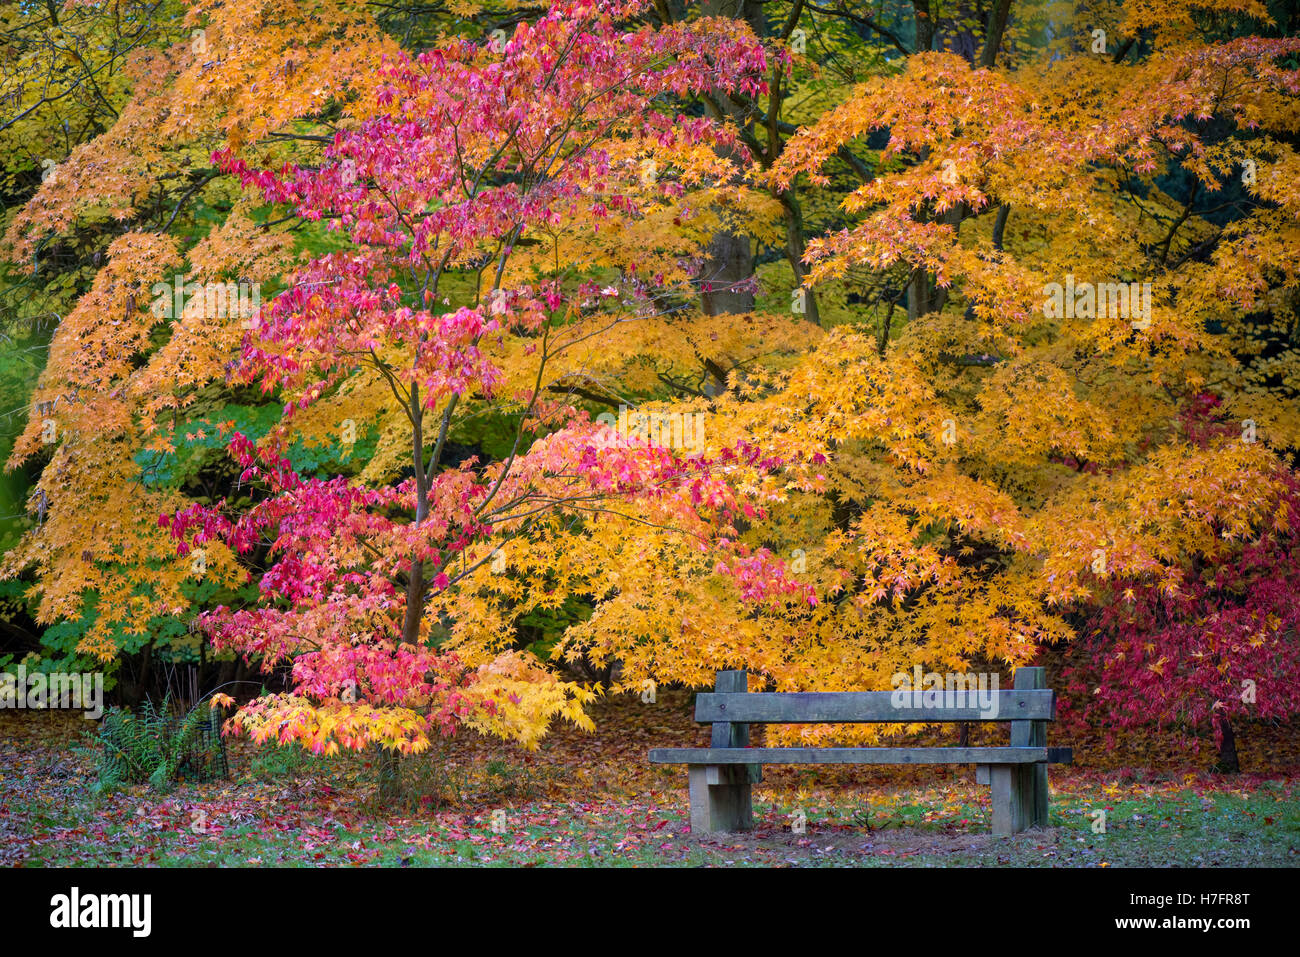 Autumn Colored Acer Leaves Stock Photo